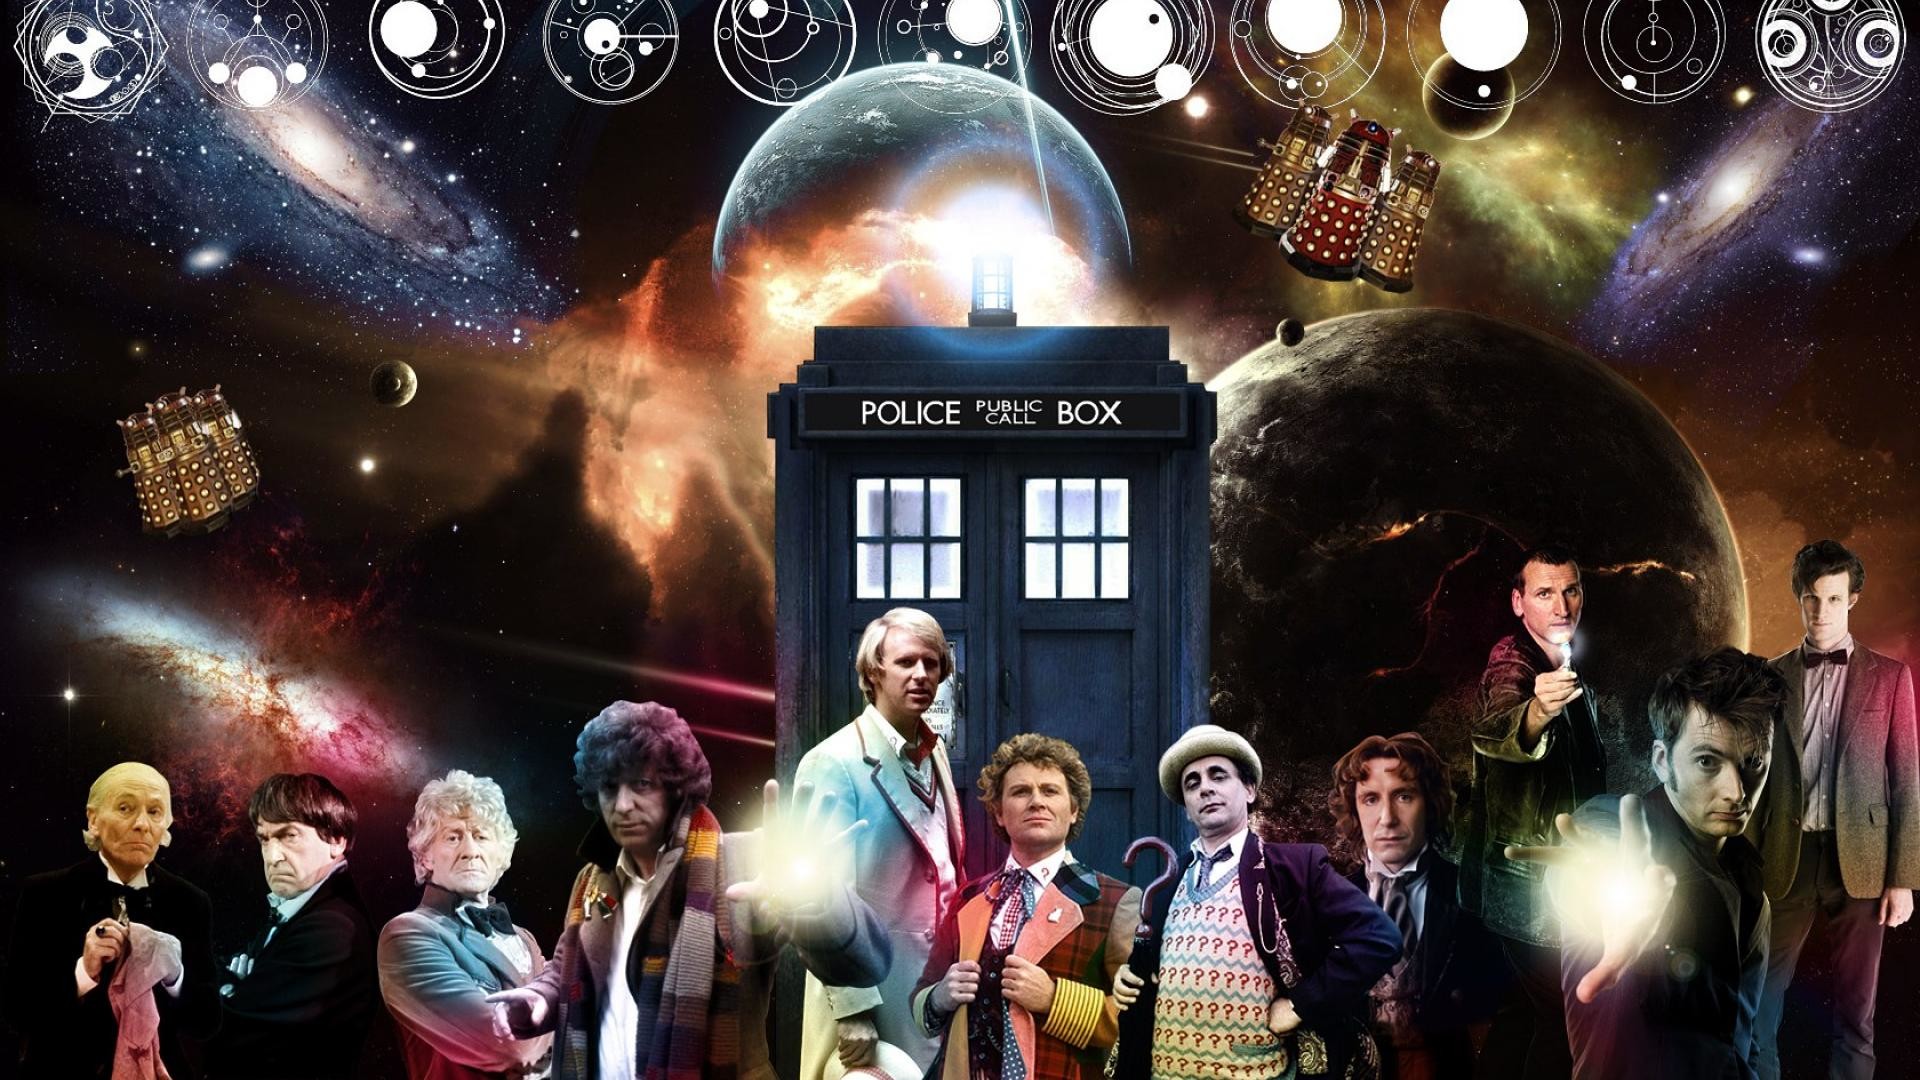 Doctor Who All Doctors, HD Wallpaper and FREE Stock Photo